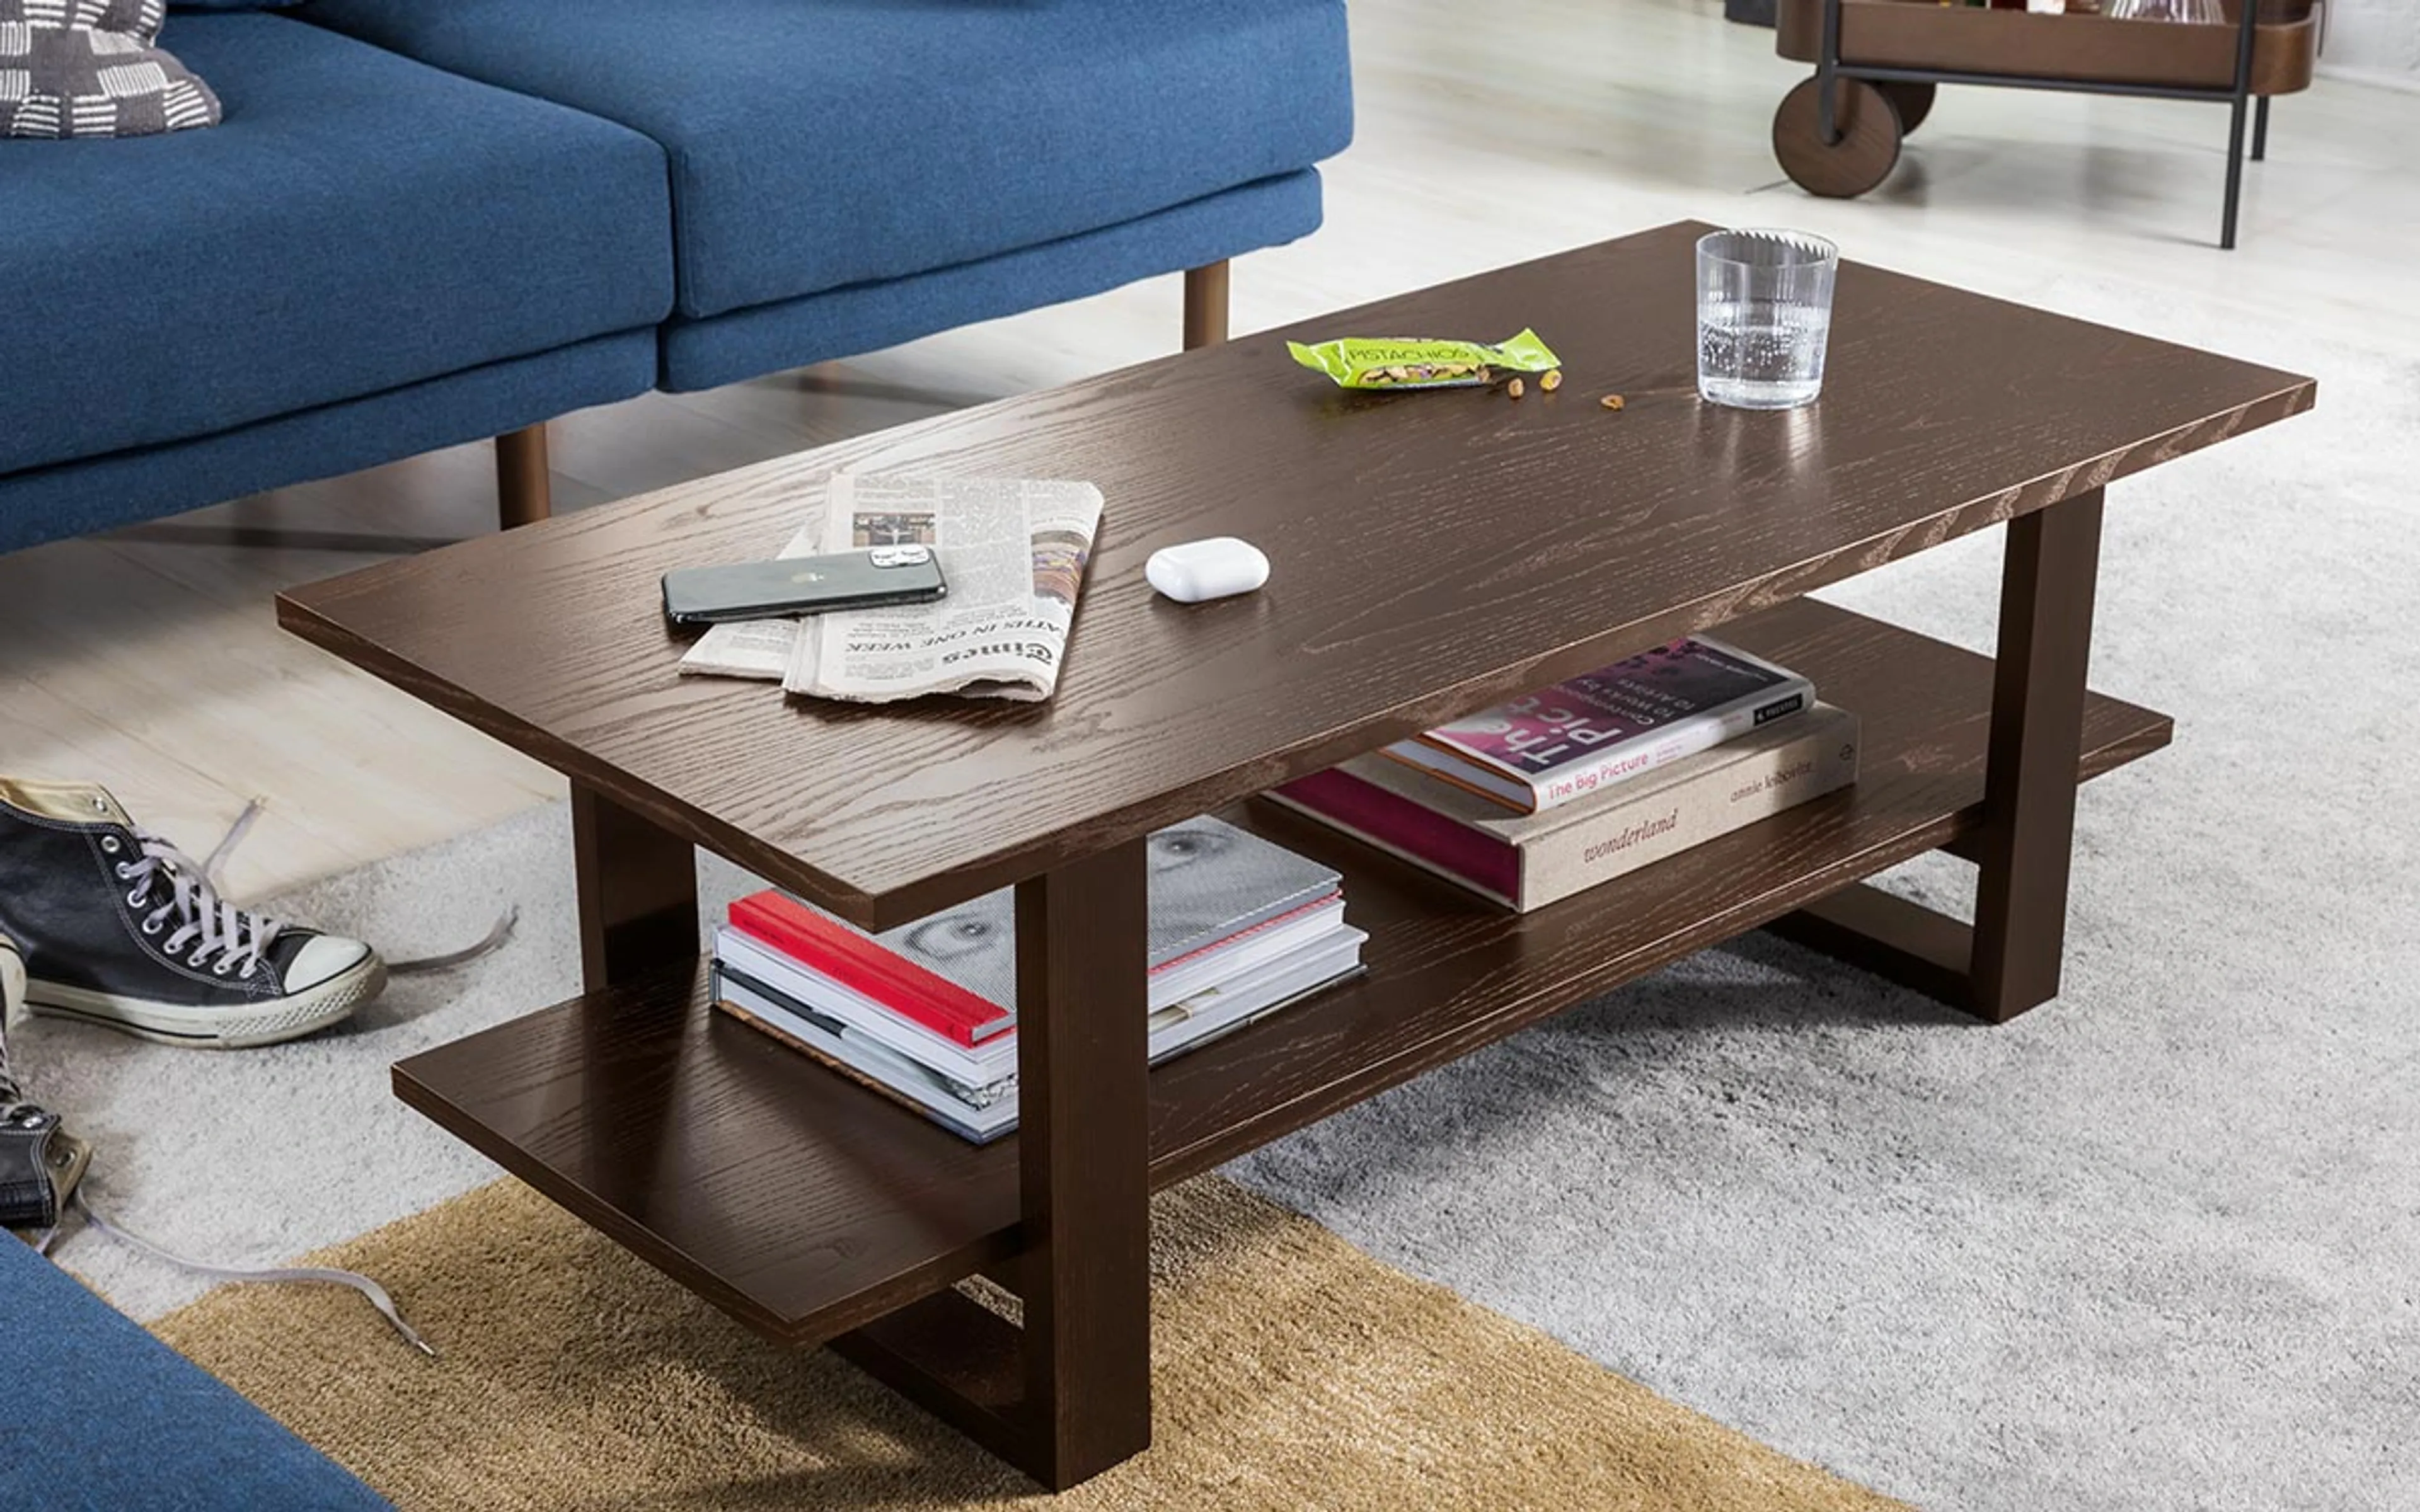 Index Coffee Table